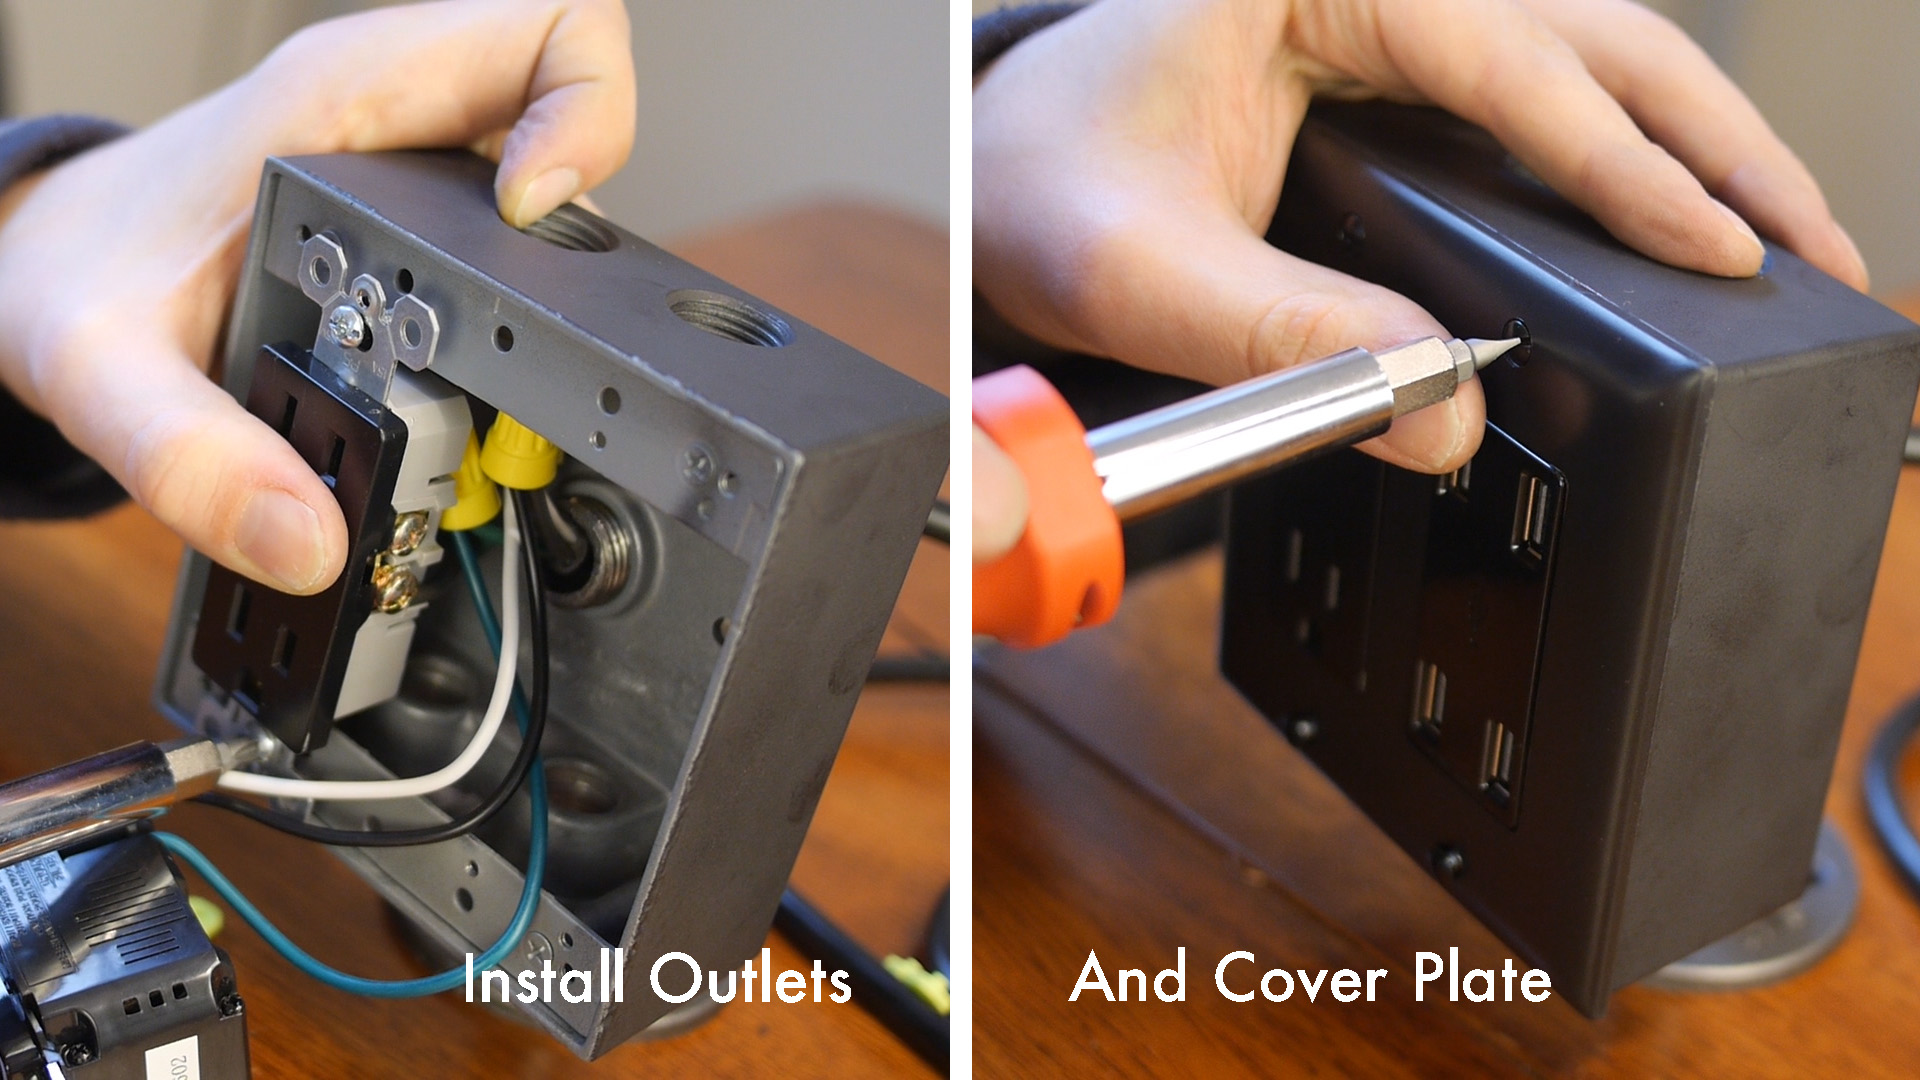 Install Outlets and Cover Plate.jpg